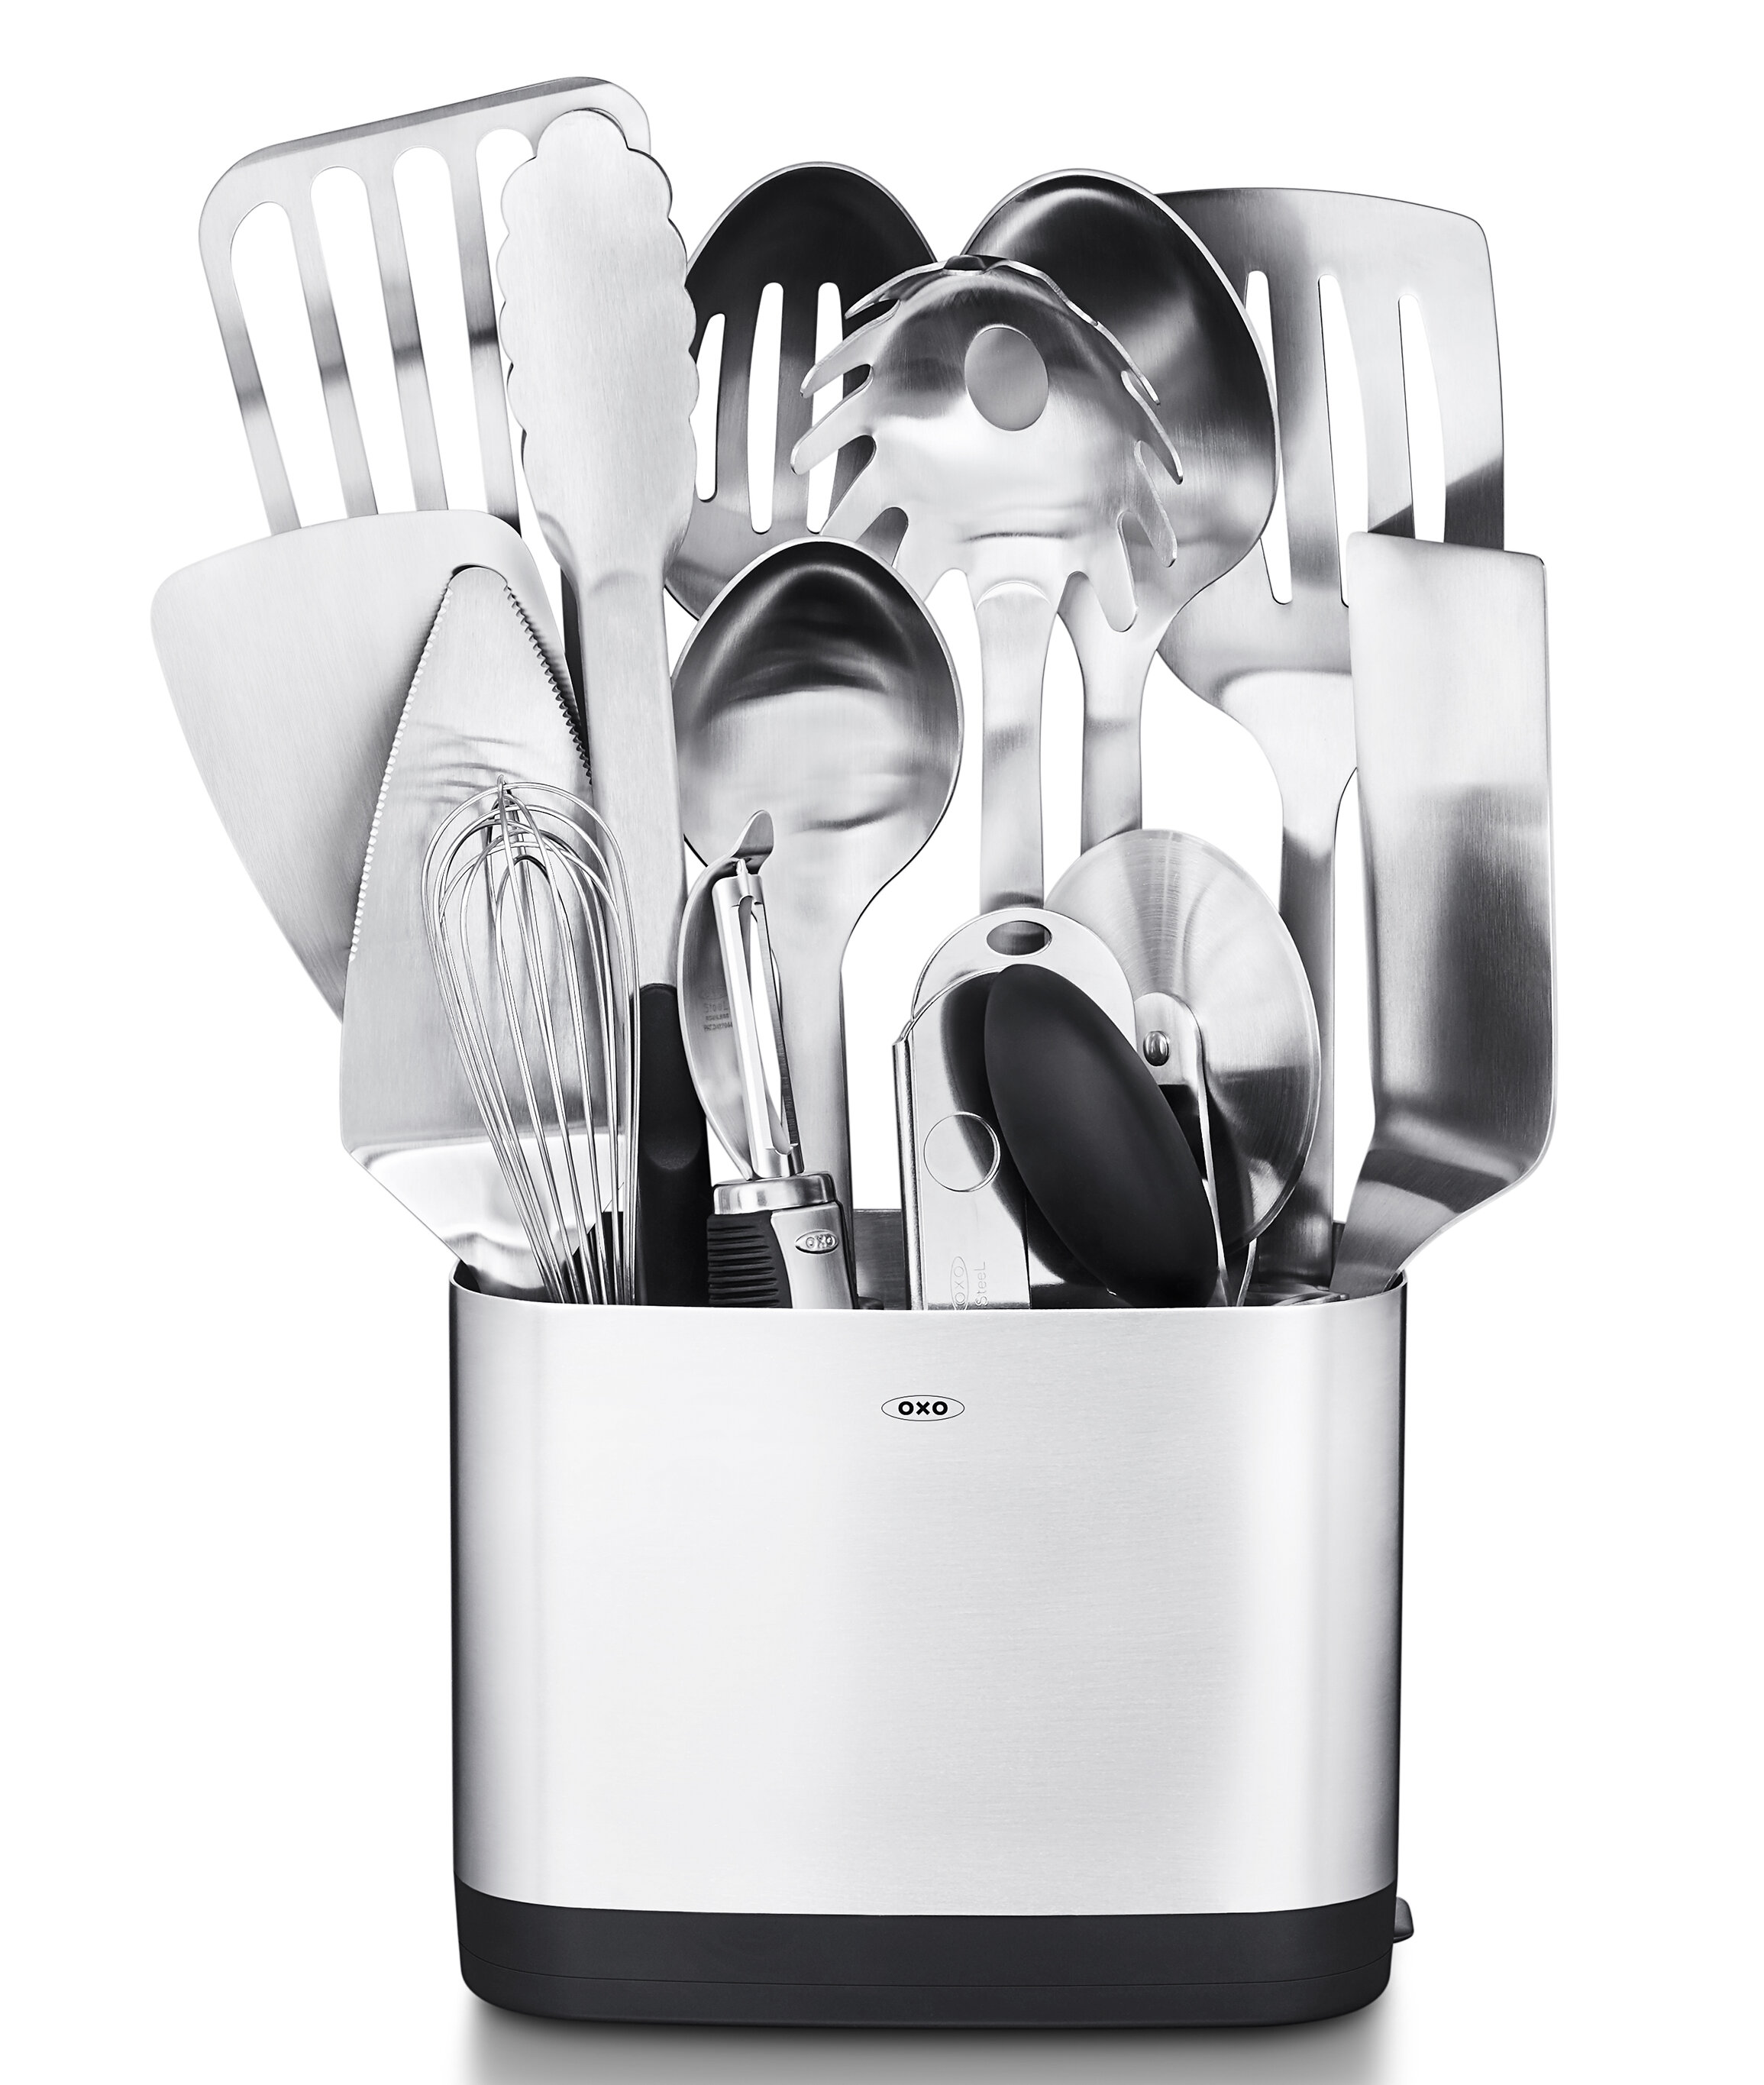 Details about   New OXO Good Grips Stainless Steel Utensil Holder Kitchen Fee Post